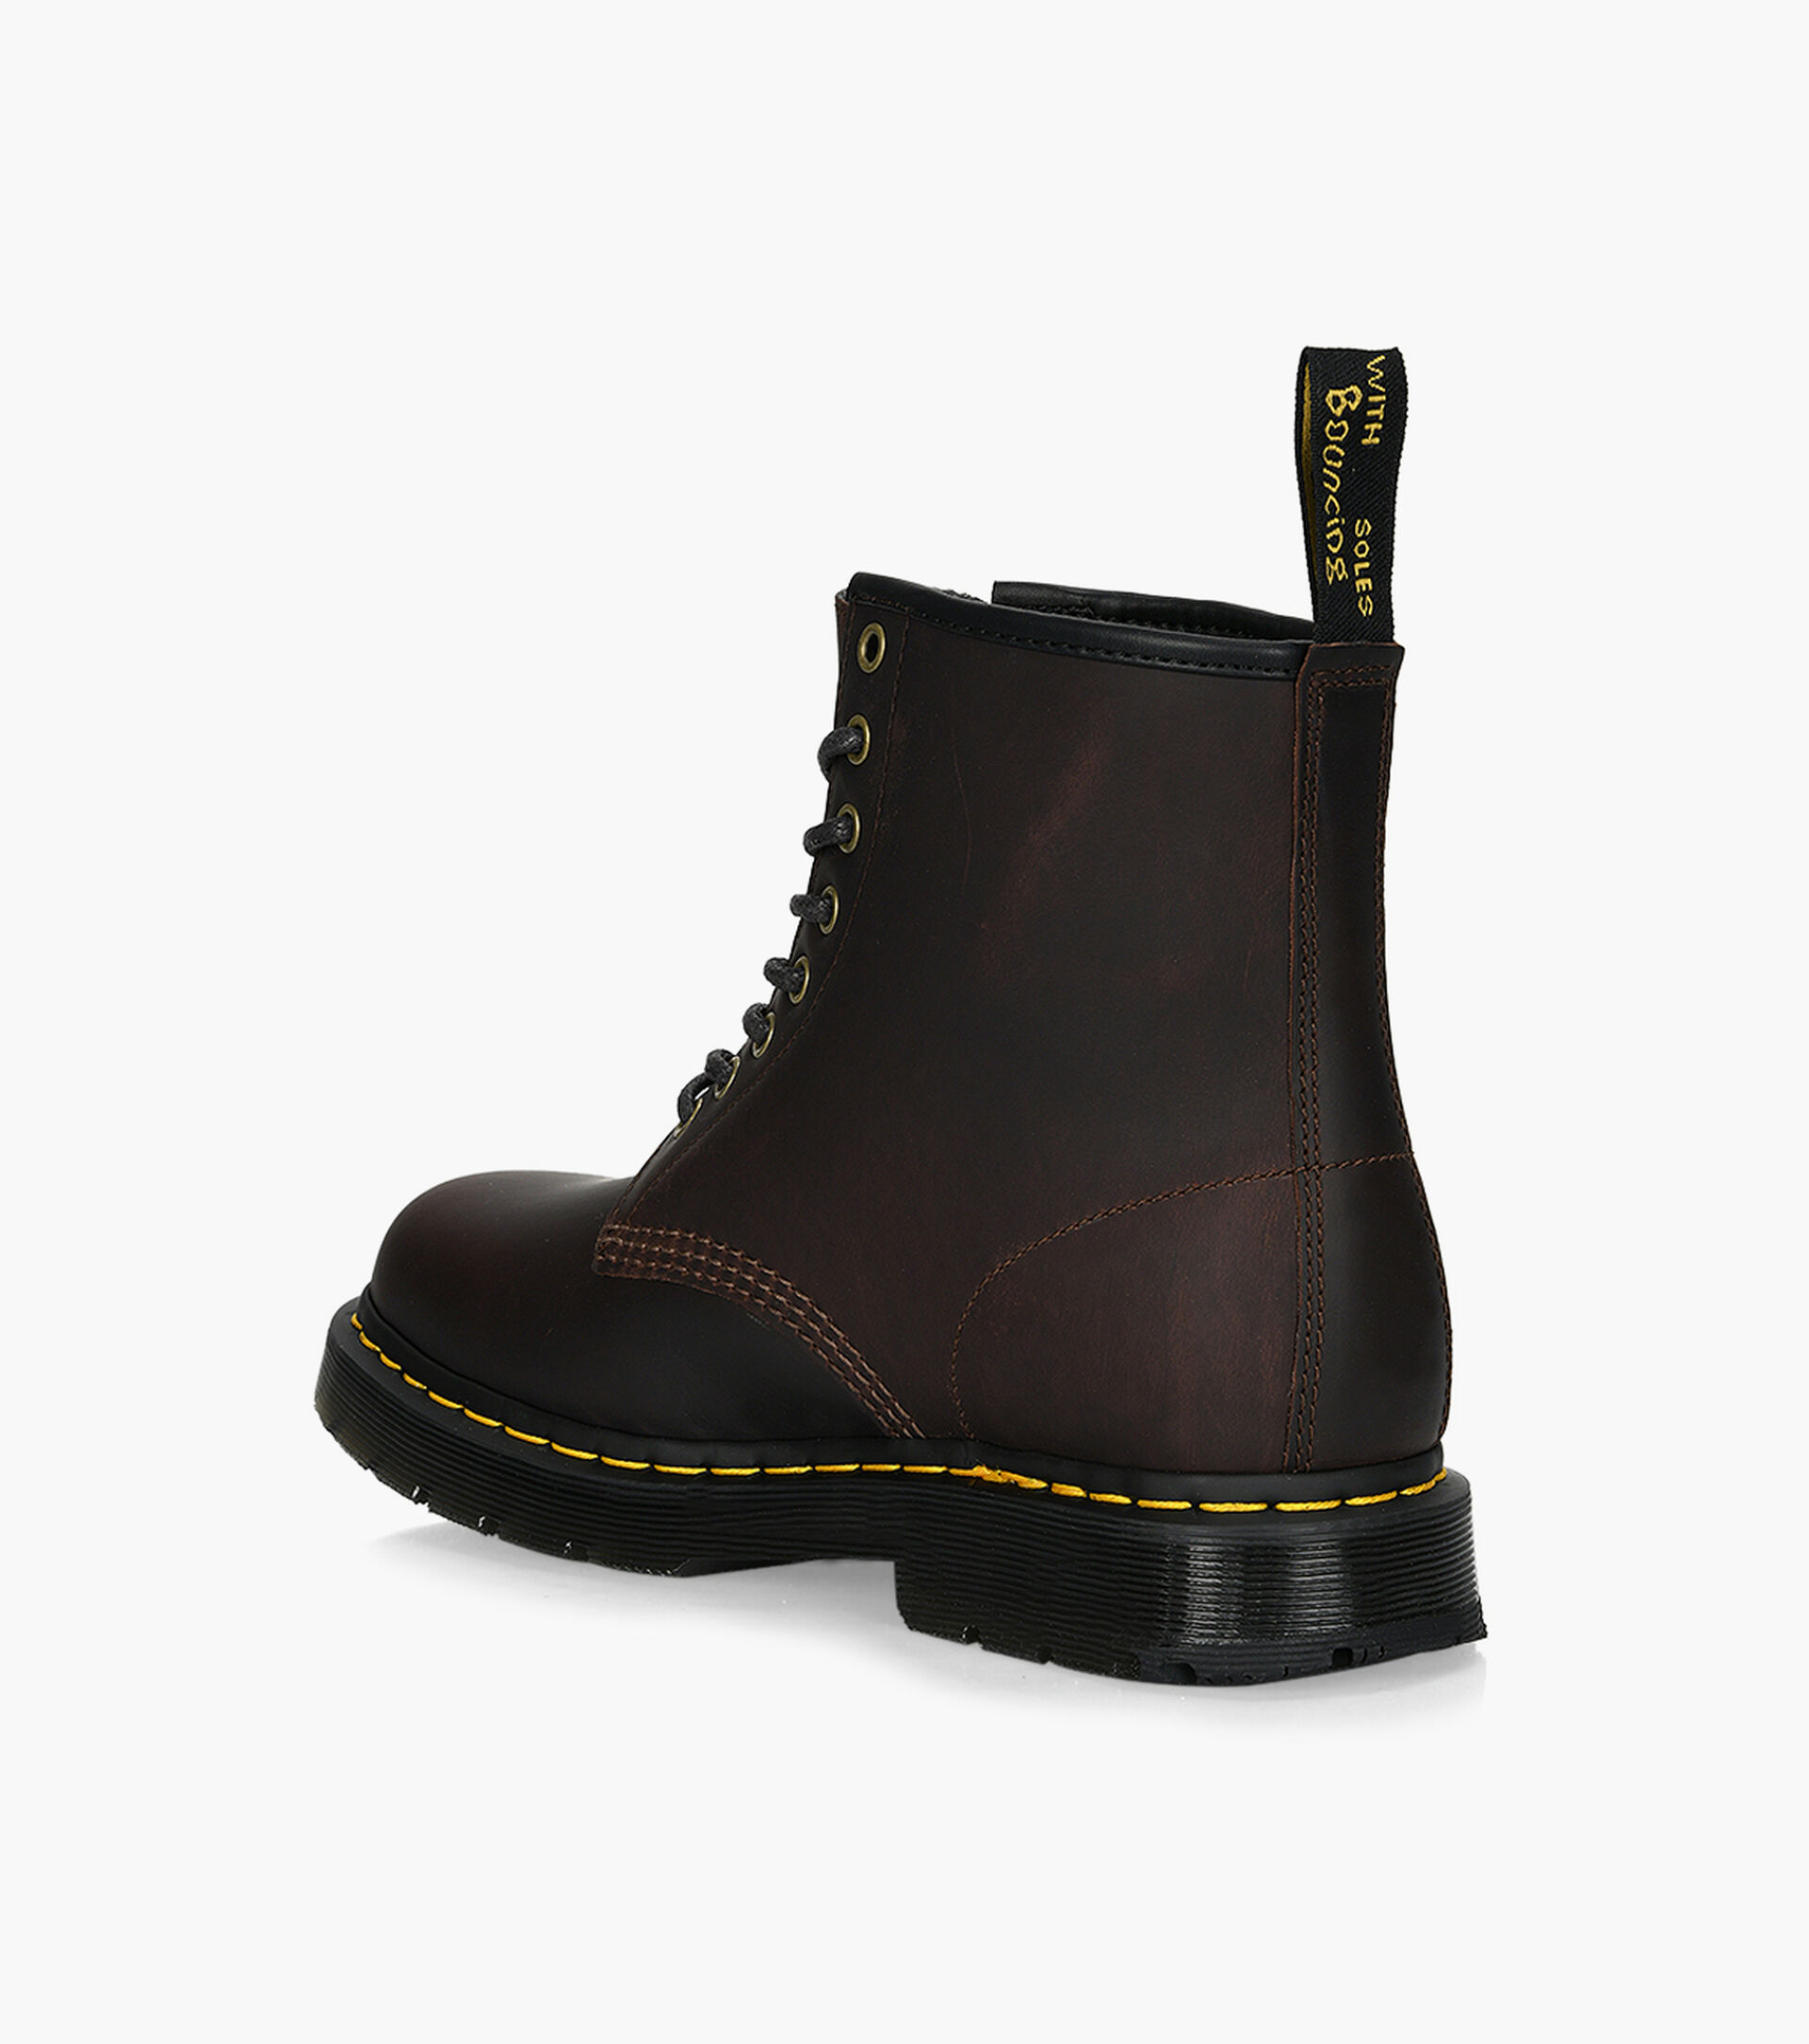 DR. MARTENS 1460 WINTERGRIP LACE UP BOOTS - Leather | Browns Shoes